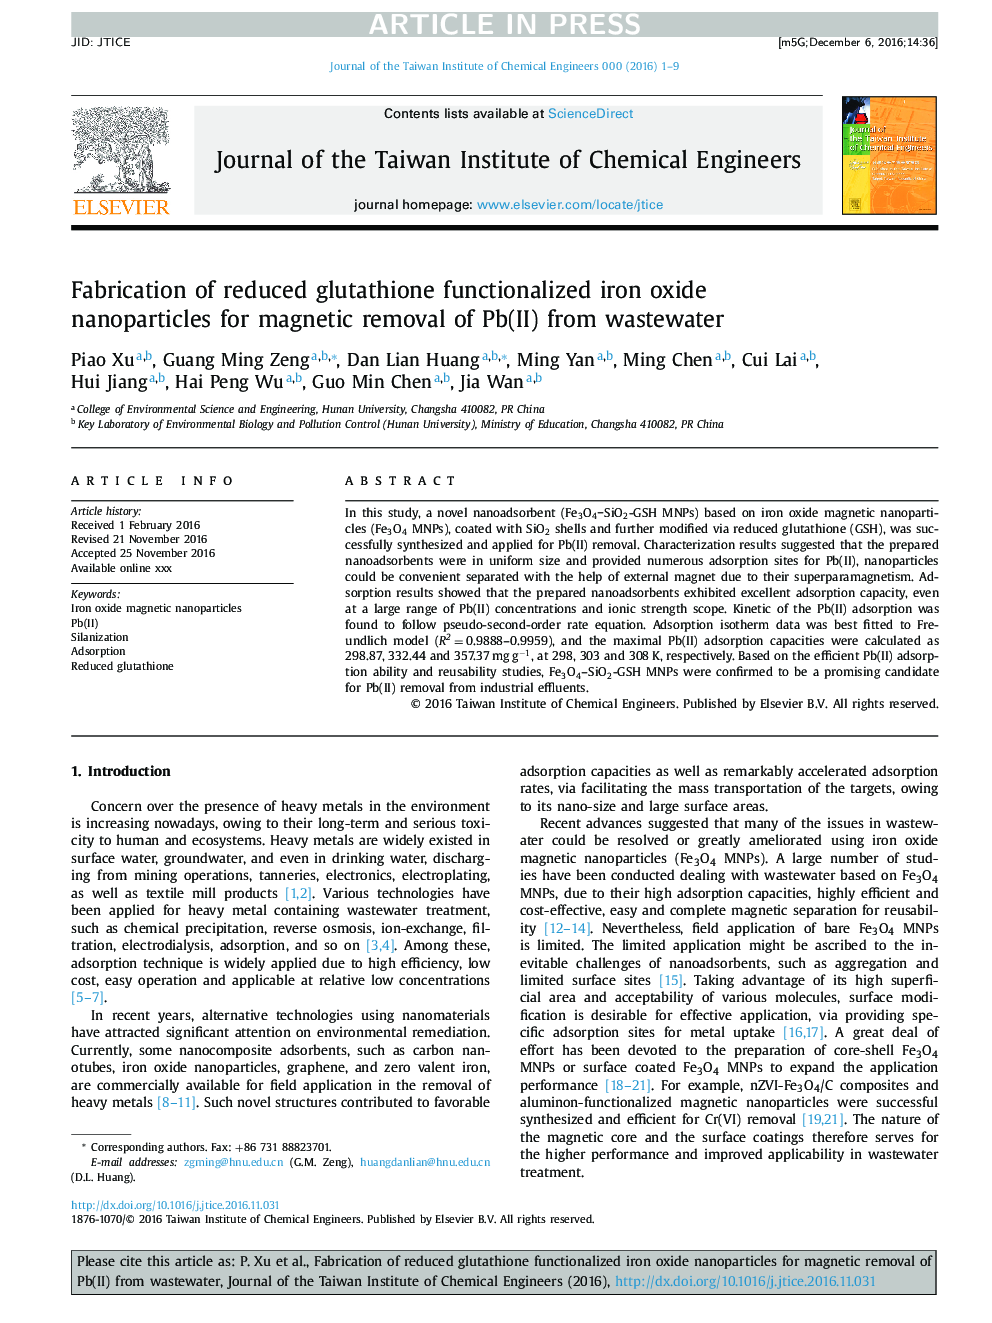 Fabrication of reduced glutathione functionalized iron oxide nanoparticles for magnetic removal of Pb(II) from wastewater